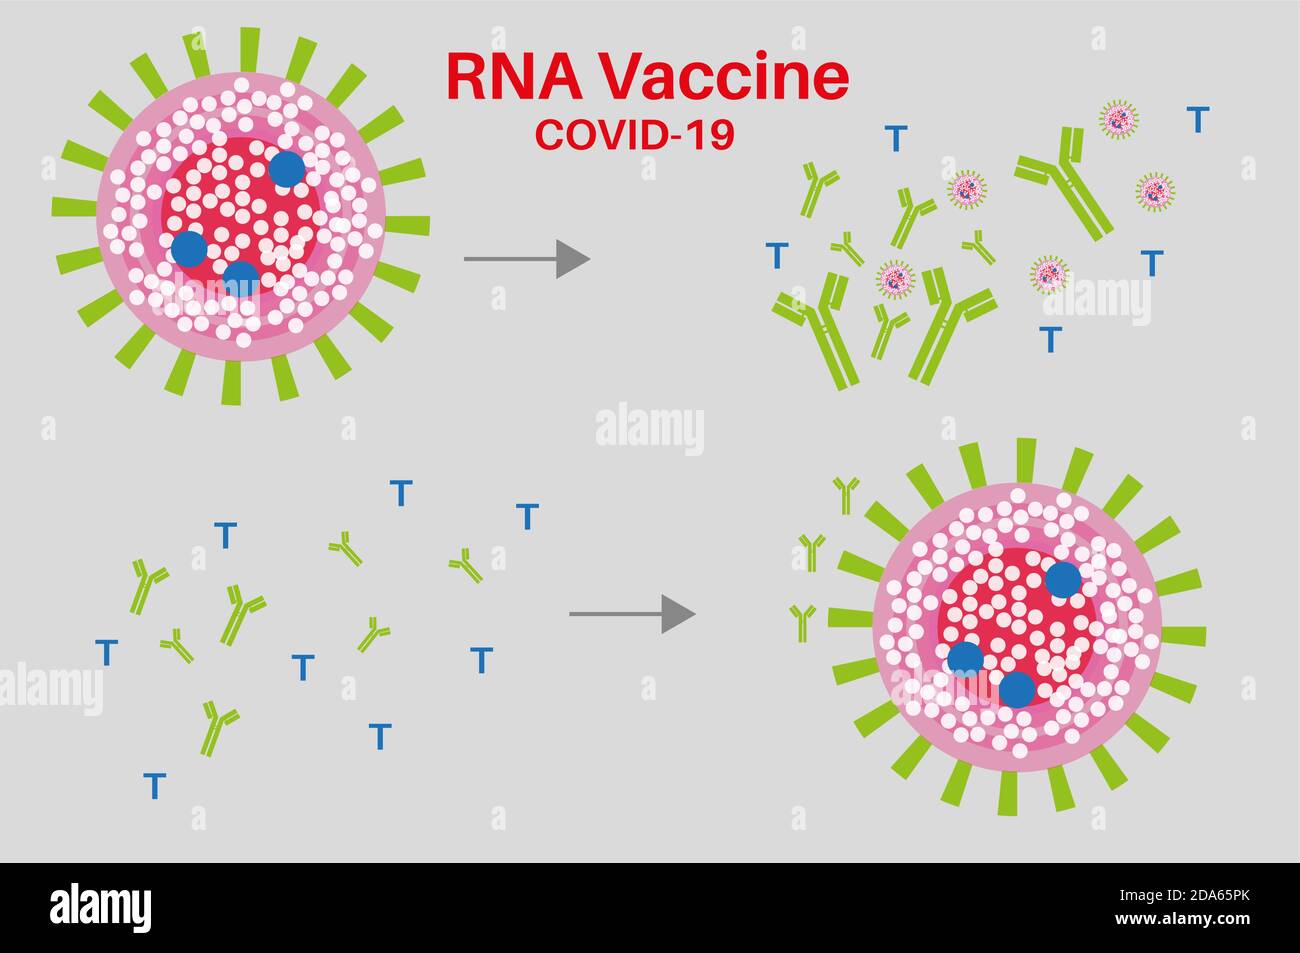 RNA Covid vaccine with spike proteins antibodies and T-cells Stock Vector